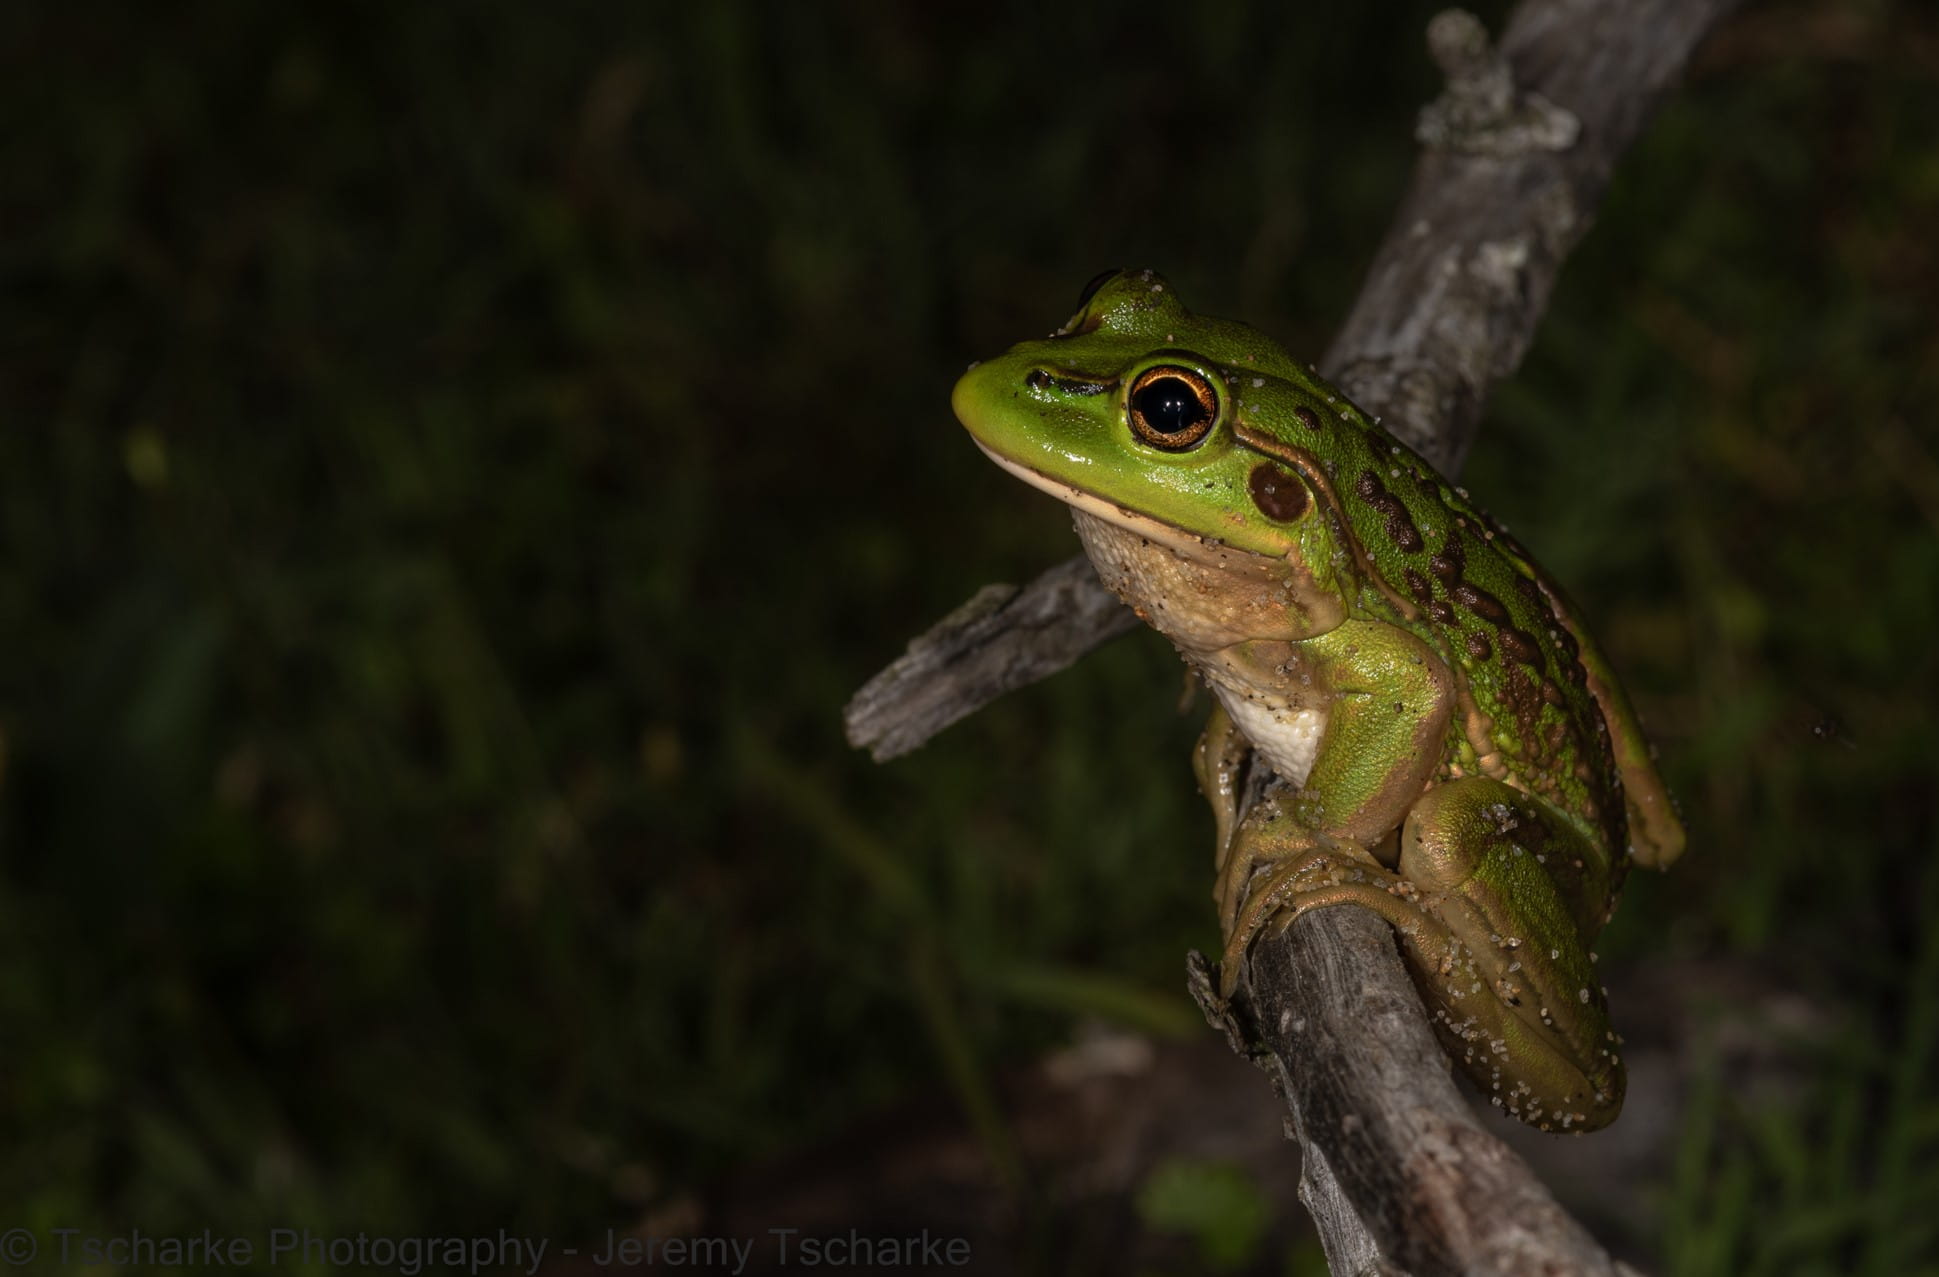 A Green frog rests on a branch